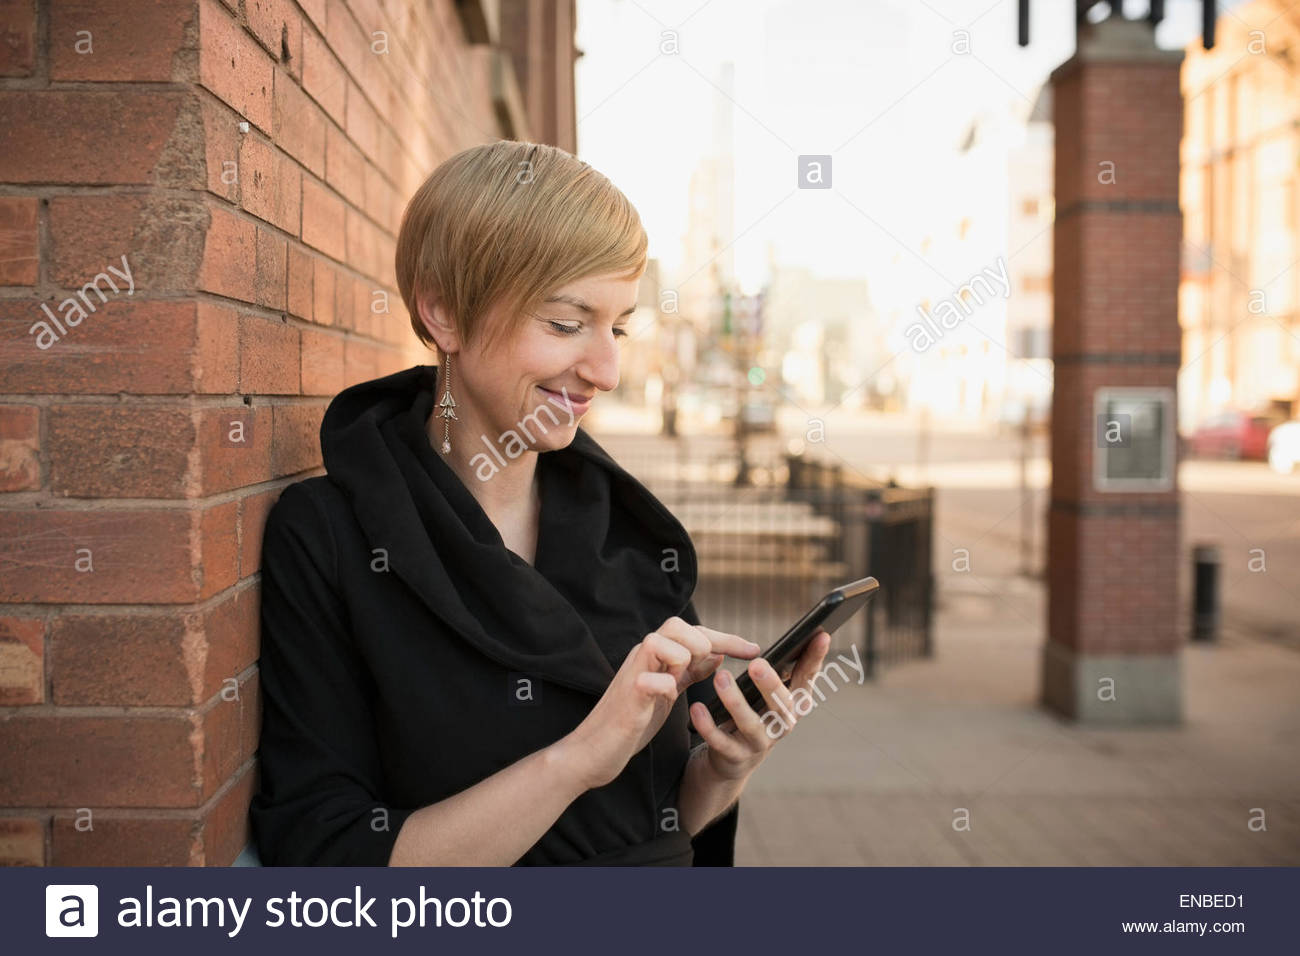 Smiling woman texting cell phone on urban street Stock Photo